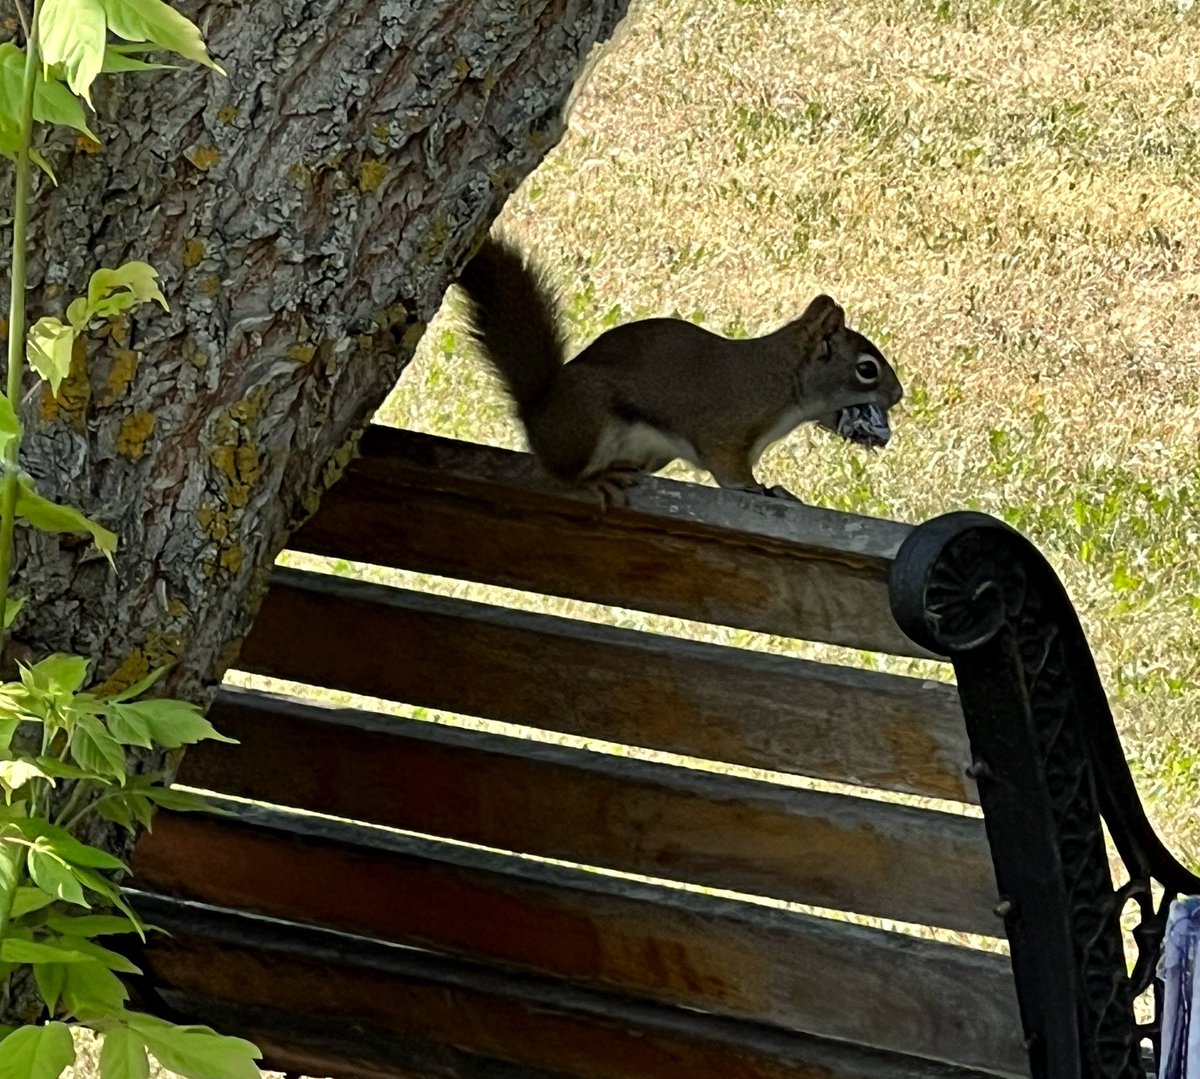 This little guy was holding on to his acorn like nobody’s business! 
🐿️ Was having the best time scampering up and down the tree! 
#Wyecliffwonders #busysquirrel #strathconacounty